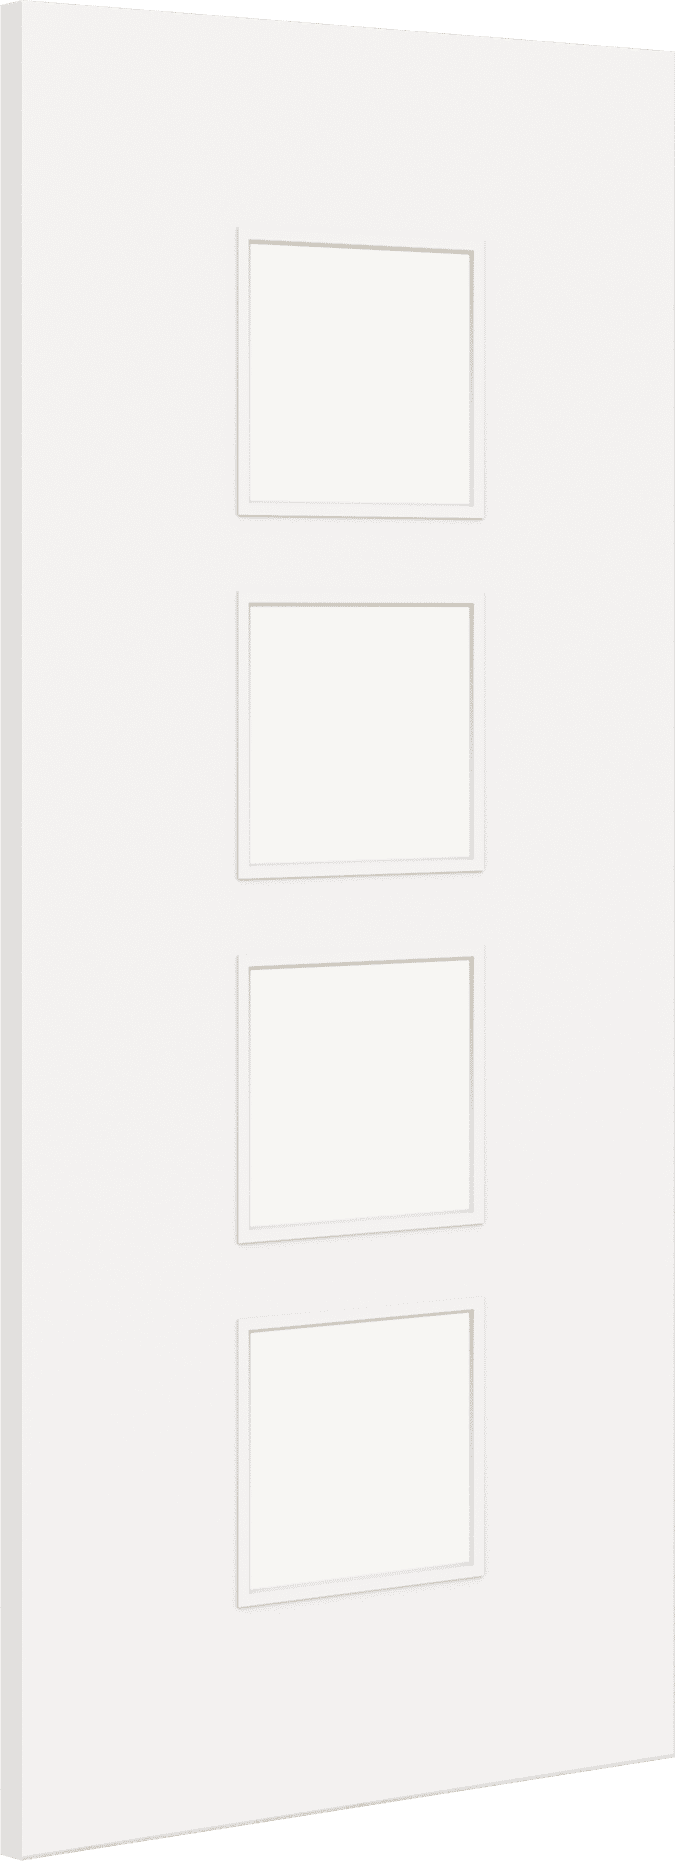 1981mm x 762mm x 44mm (30") Architectural Paint Grade White 09 Clear Glazed Fire Door Blank